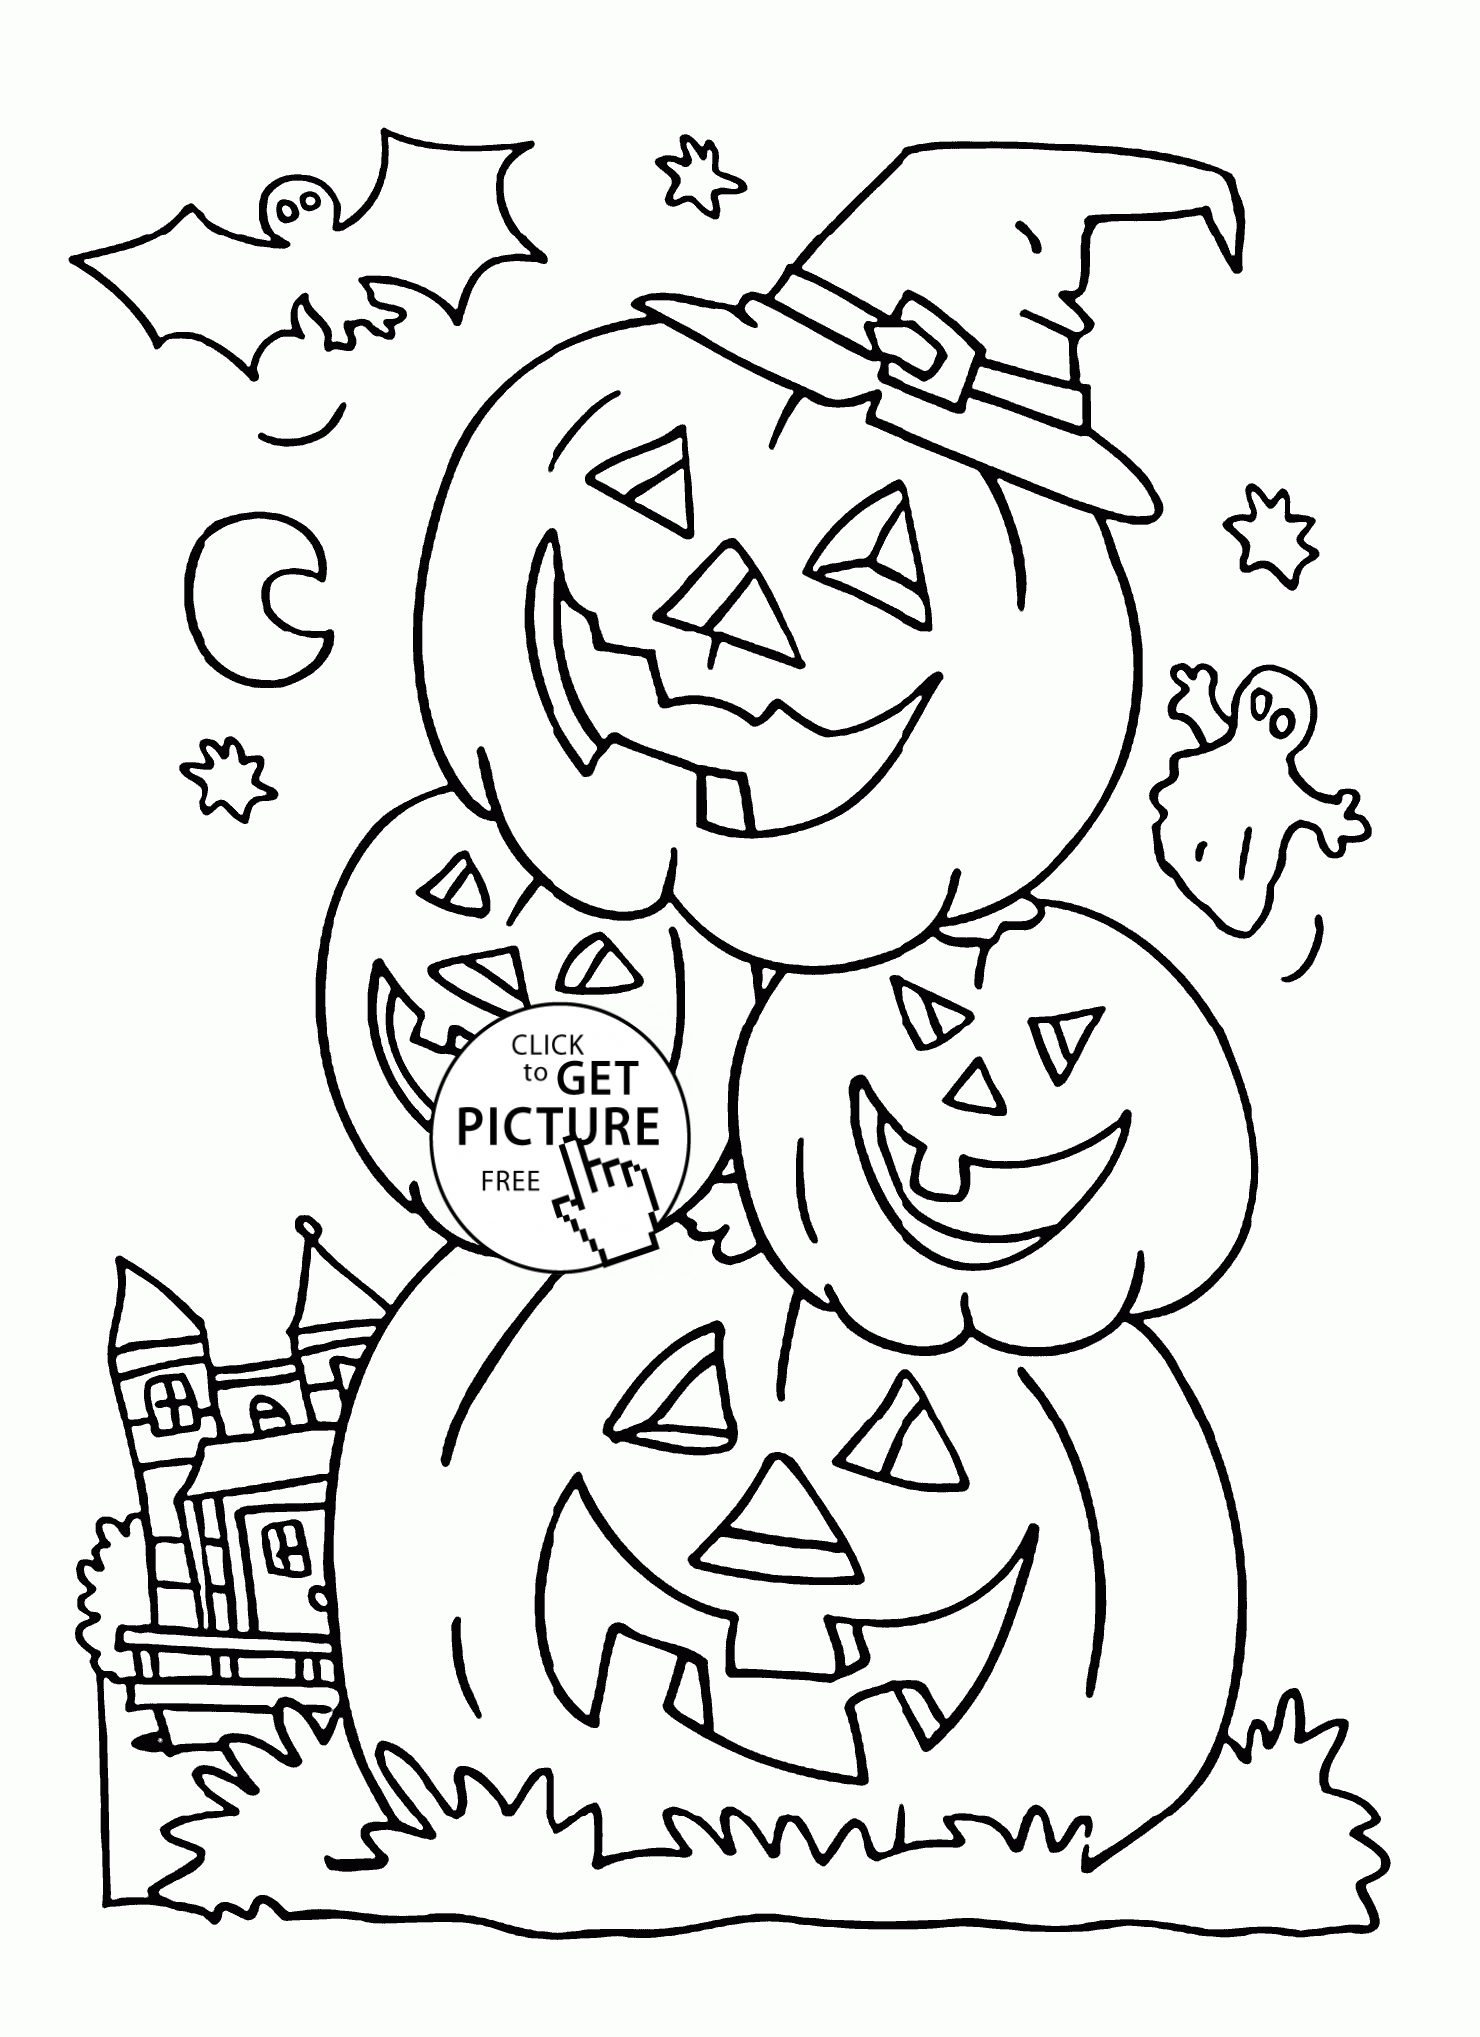 Halloween Pumpkin Coloring Pages Printables Funny Pumpkins Coloring Pages For Kids Halloween Printables Free